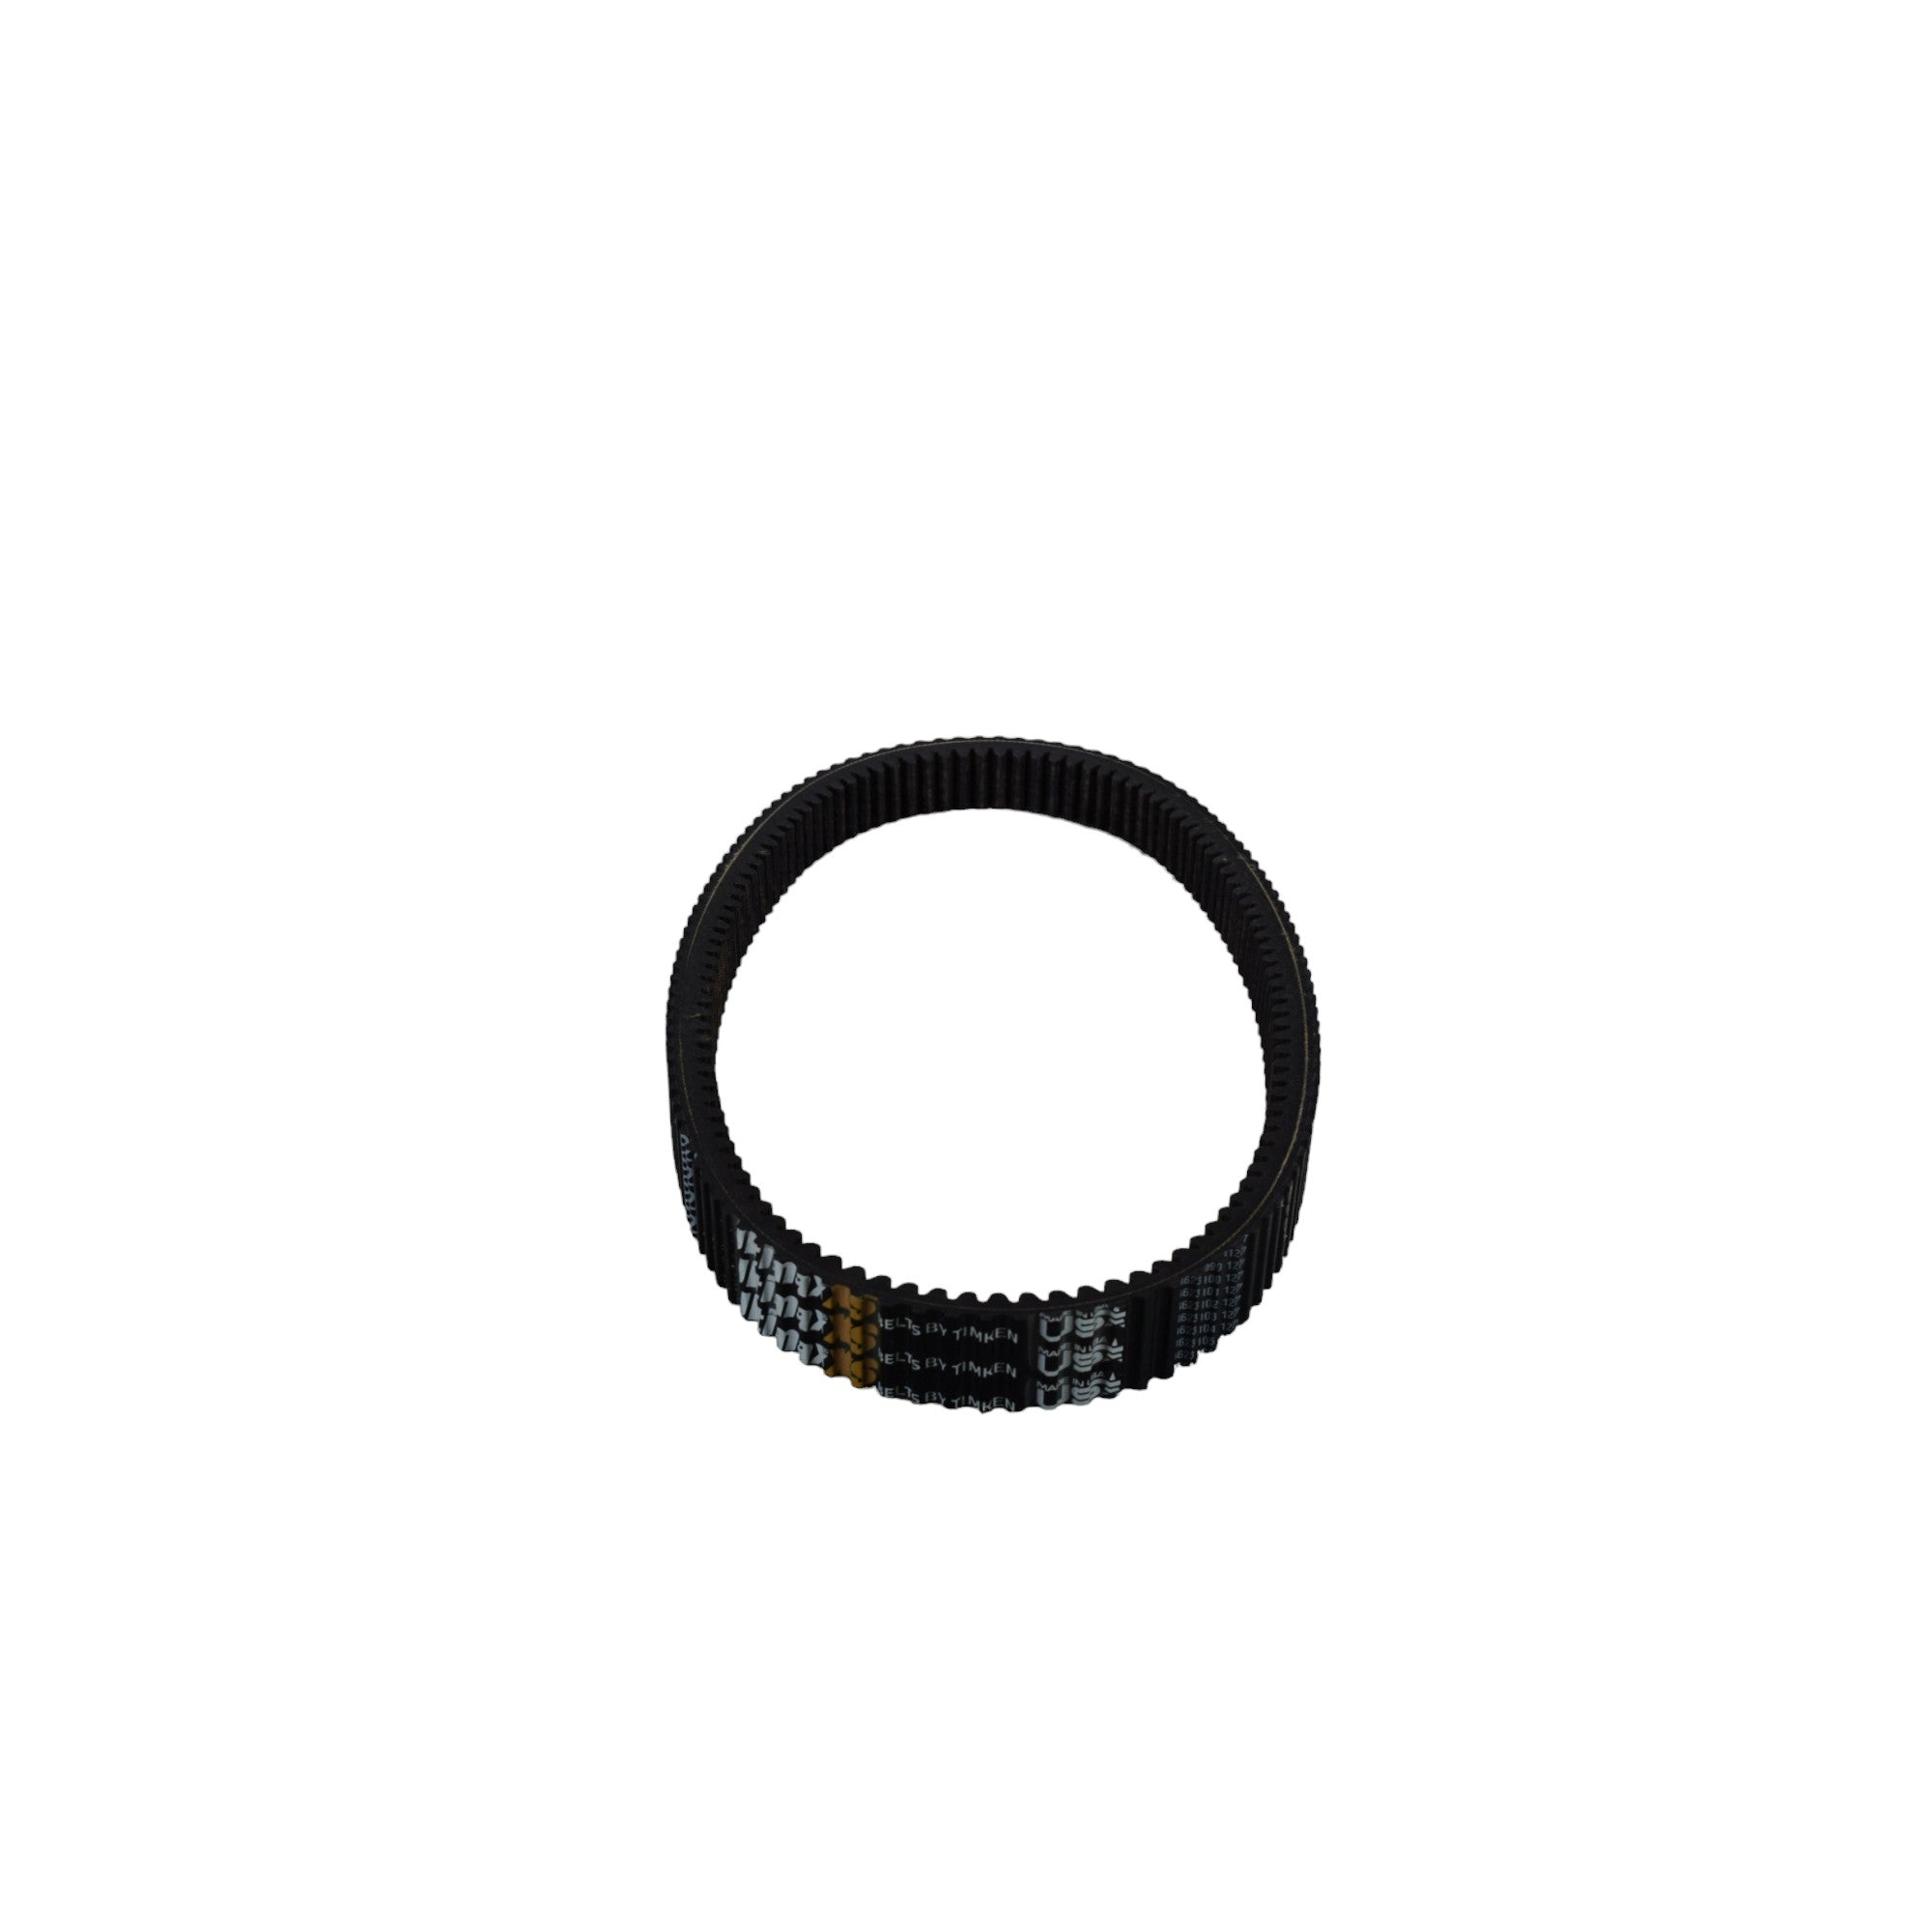 Ultimax XS824 Drive Belt for ARCTIC CAT OEM Replacement for 0627-070 (Made in USA)